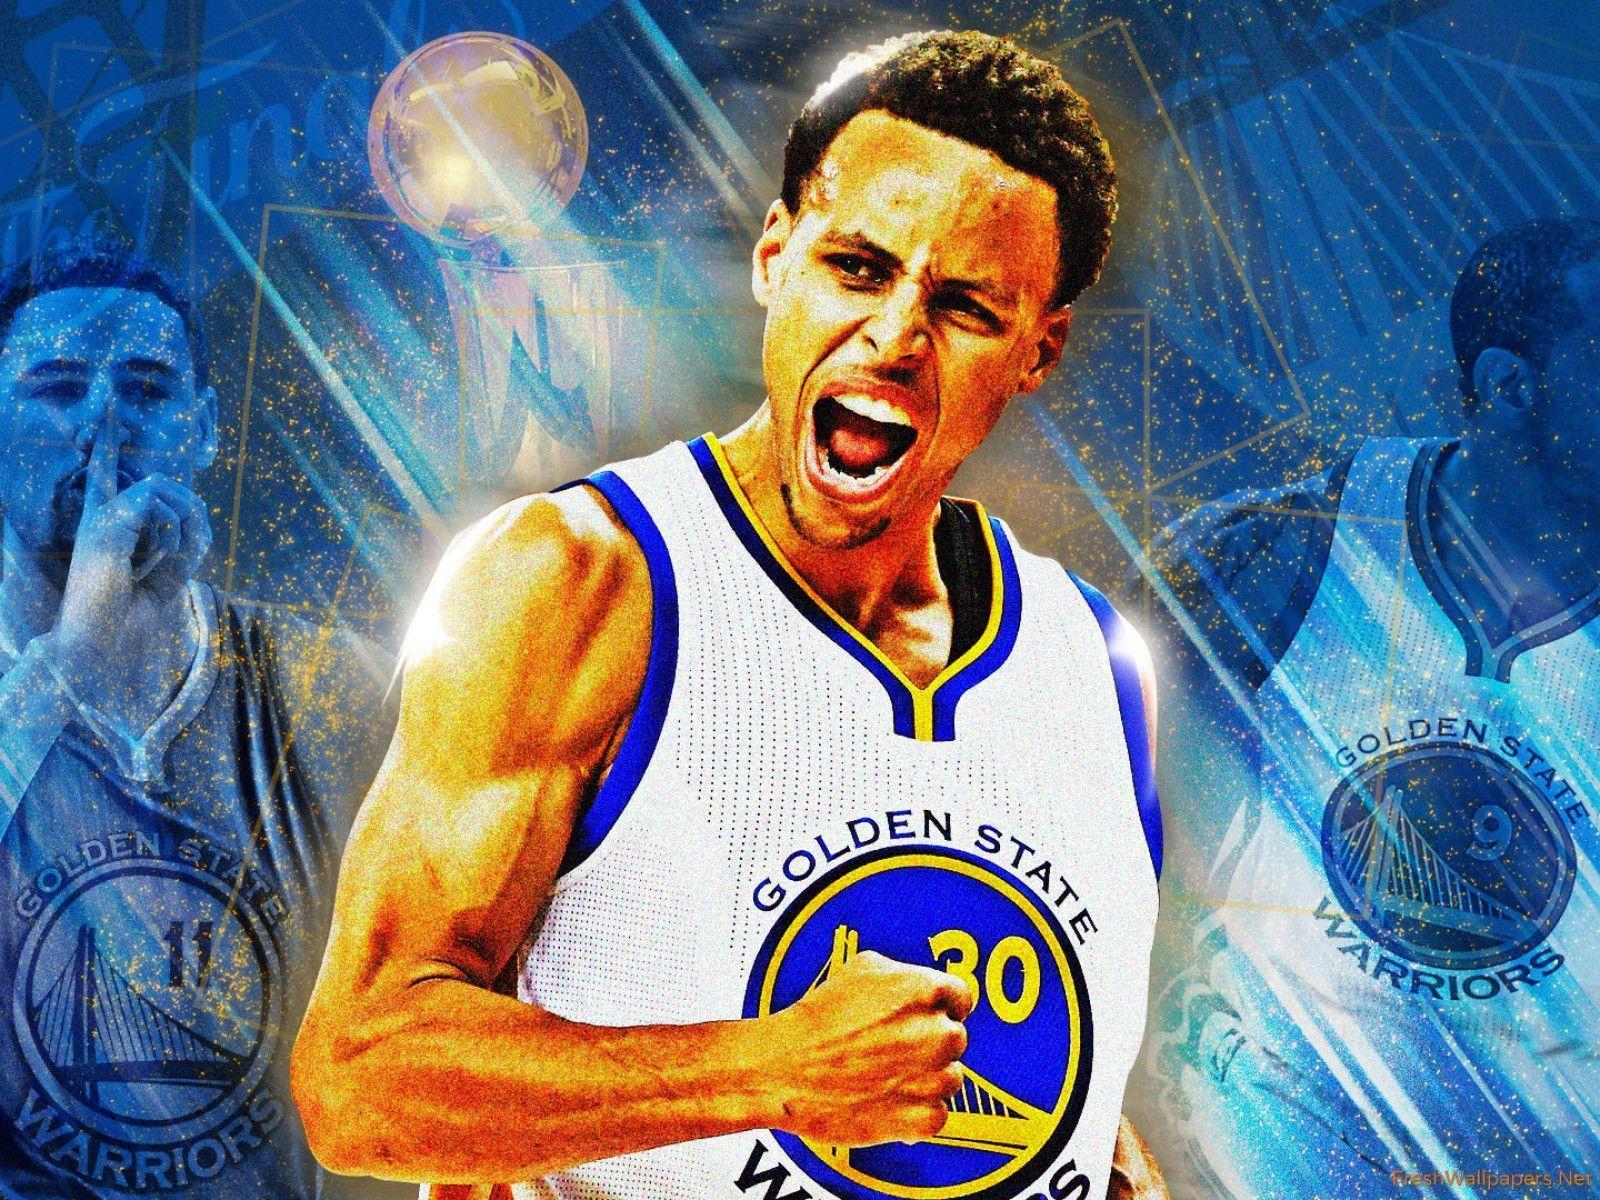 Stephen Curry 2017 Wallpapers - Wallpaper Cave